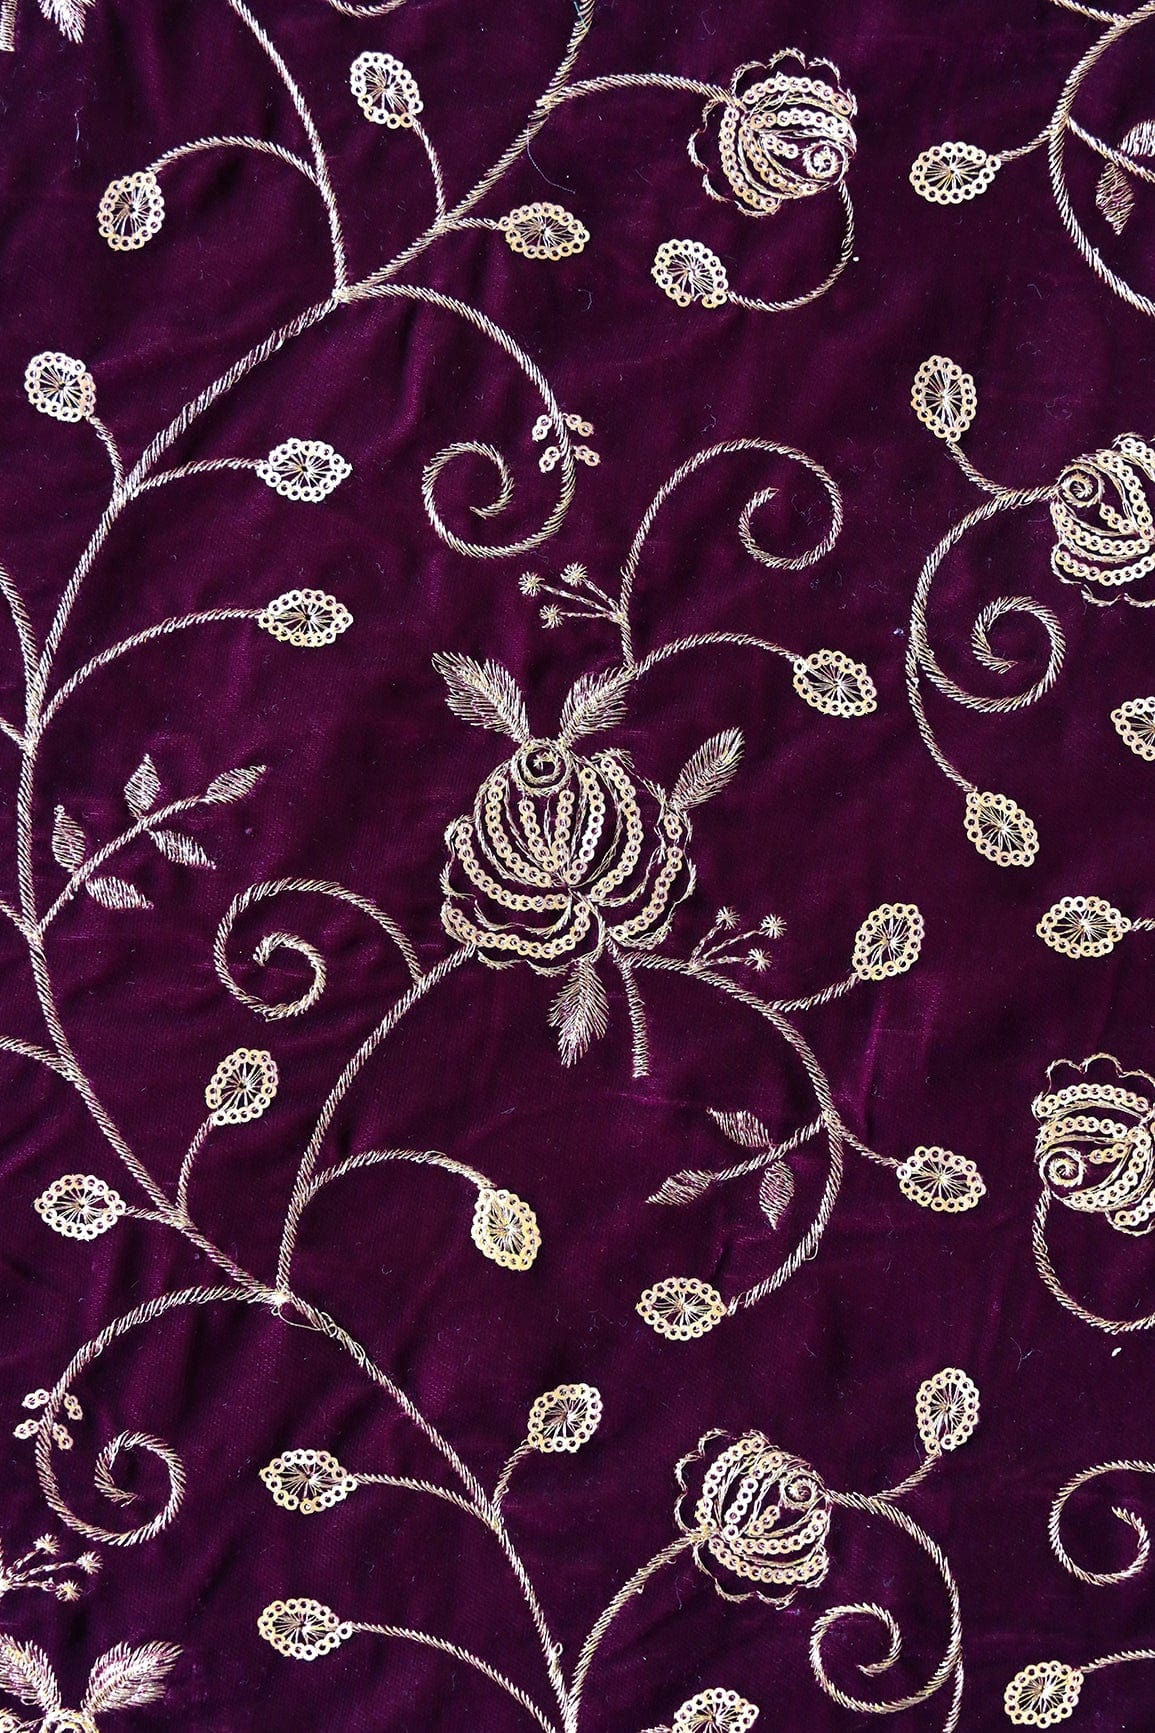 doeraa Embroidery Fabrics Gold Sequins With Gold Zari Beautiful Floral Embroidery On Purple Velvet Fabric